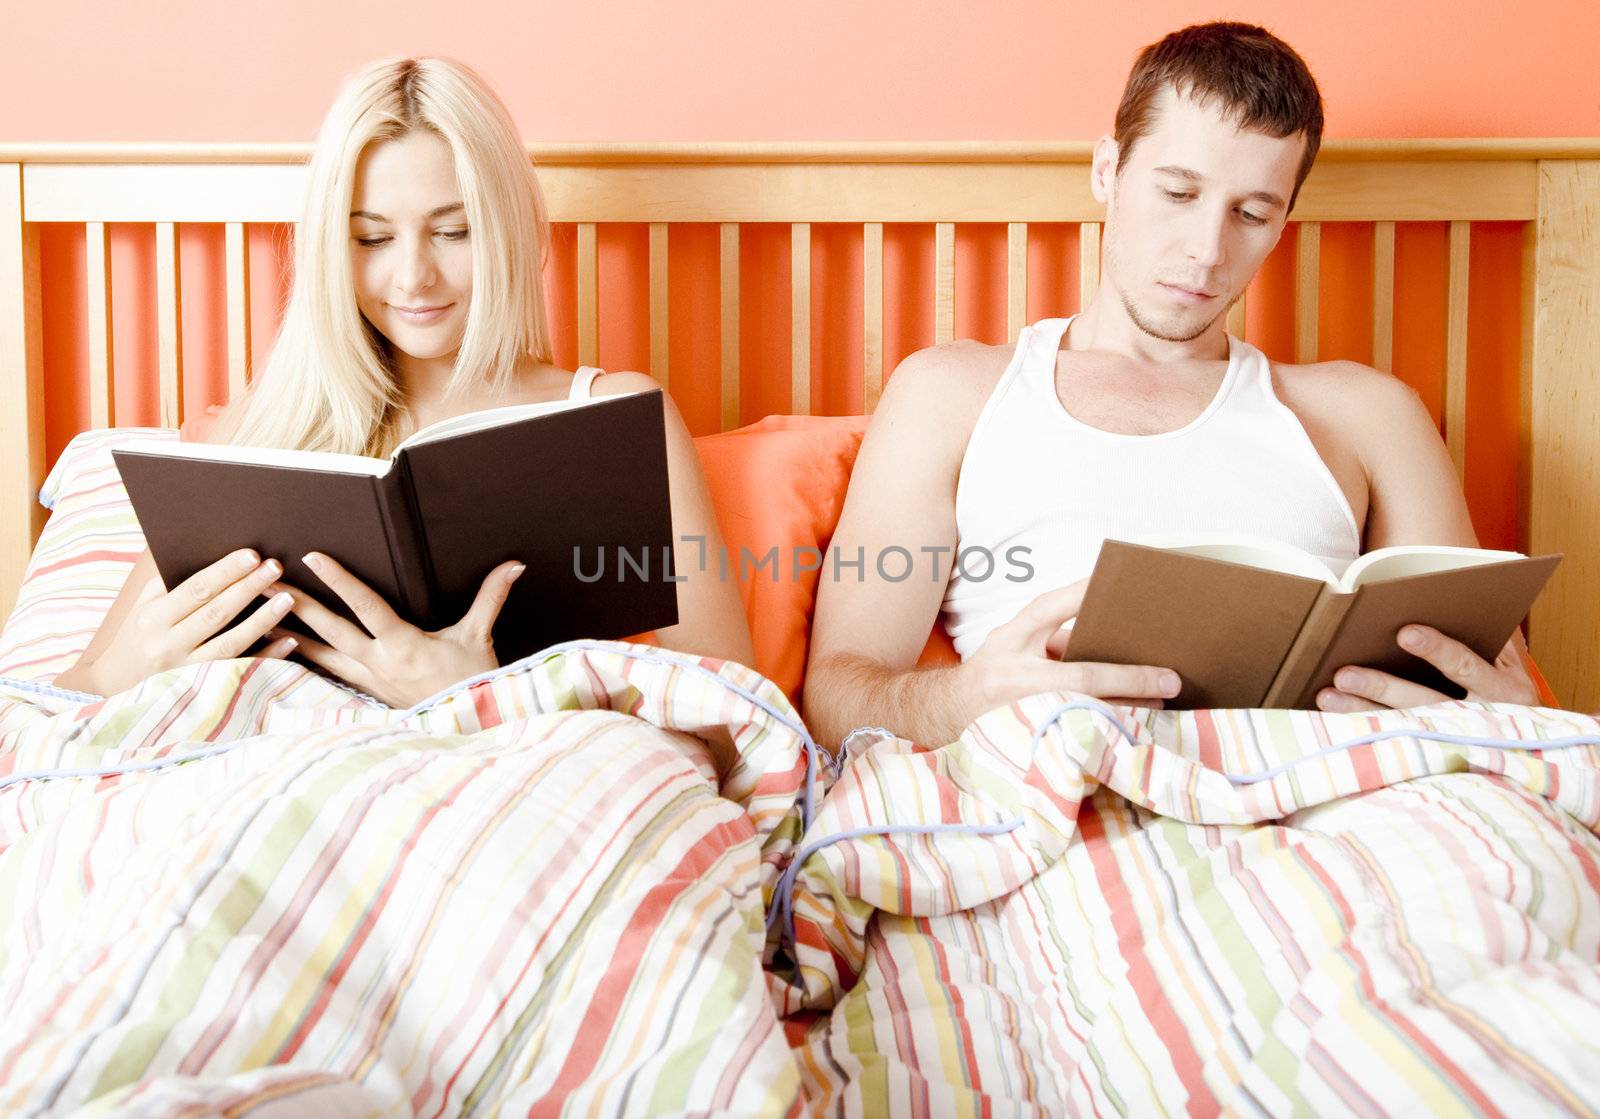 Man and woman reading side-by-side in bed. Horizontal format.